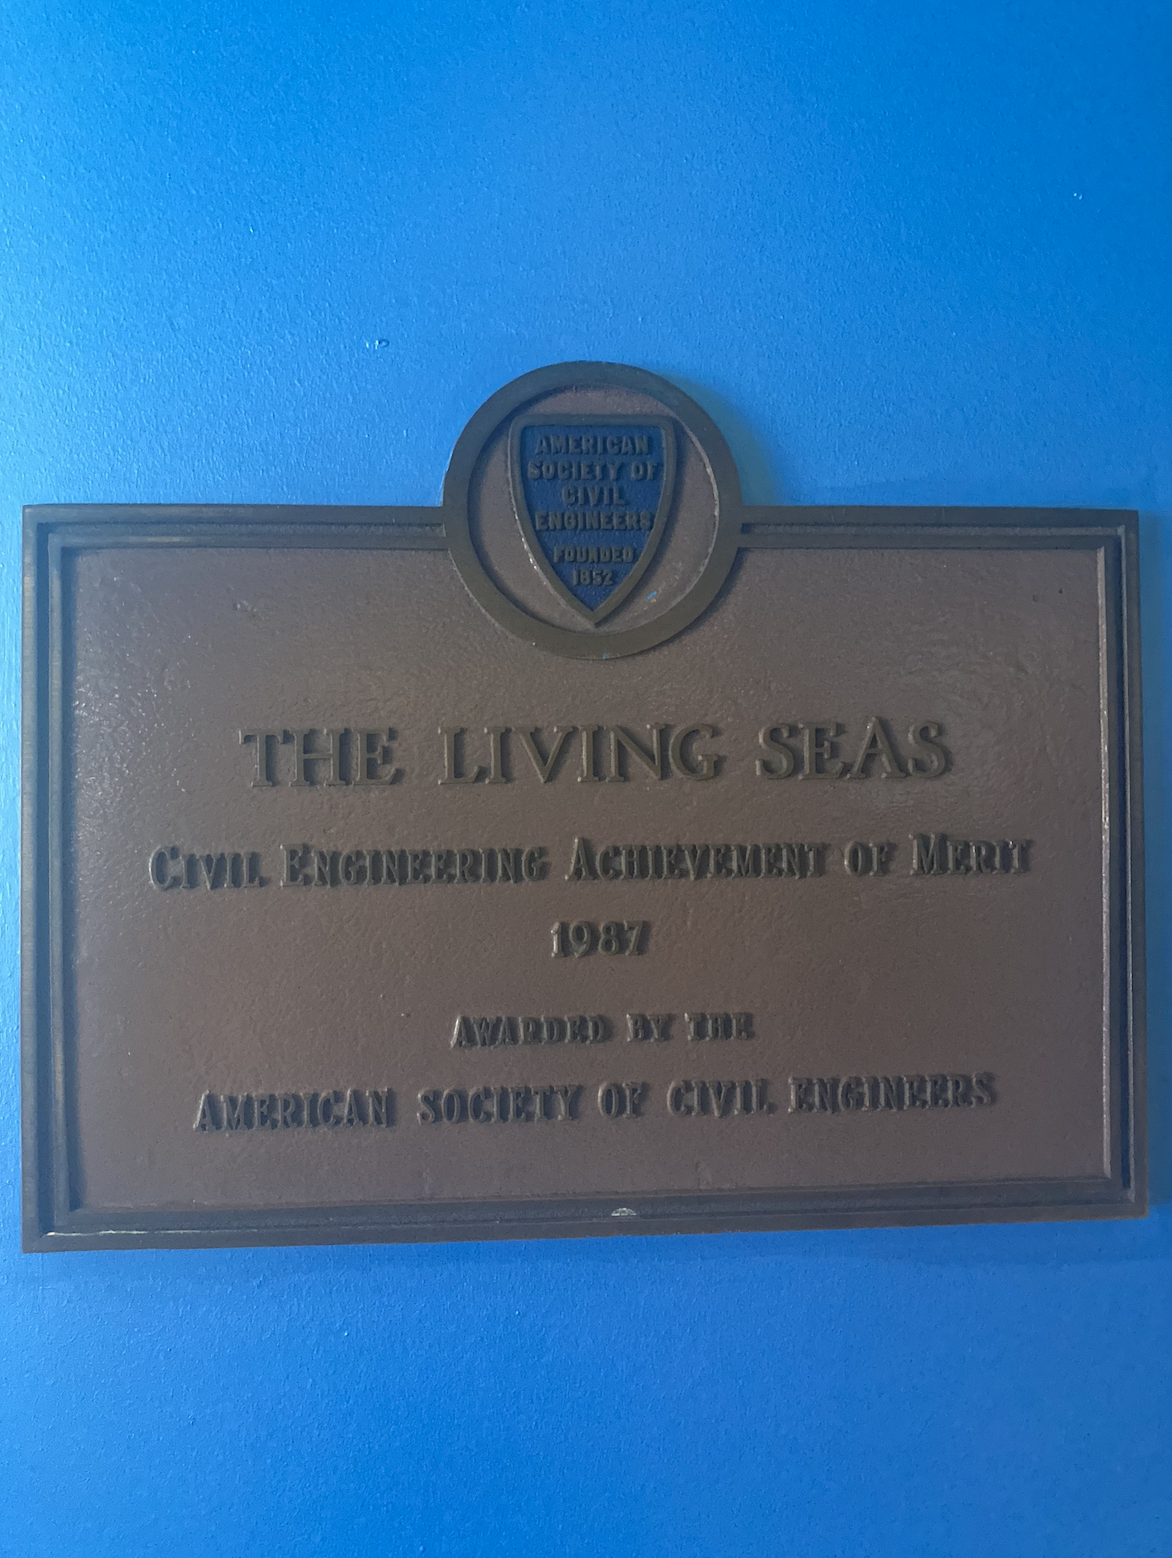 The plaque noting that the Living Seas was recognized with the Civil Engineering Achievement Award of Merit